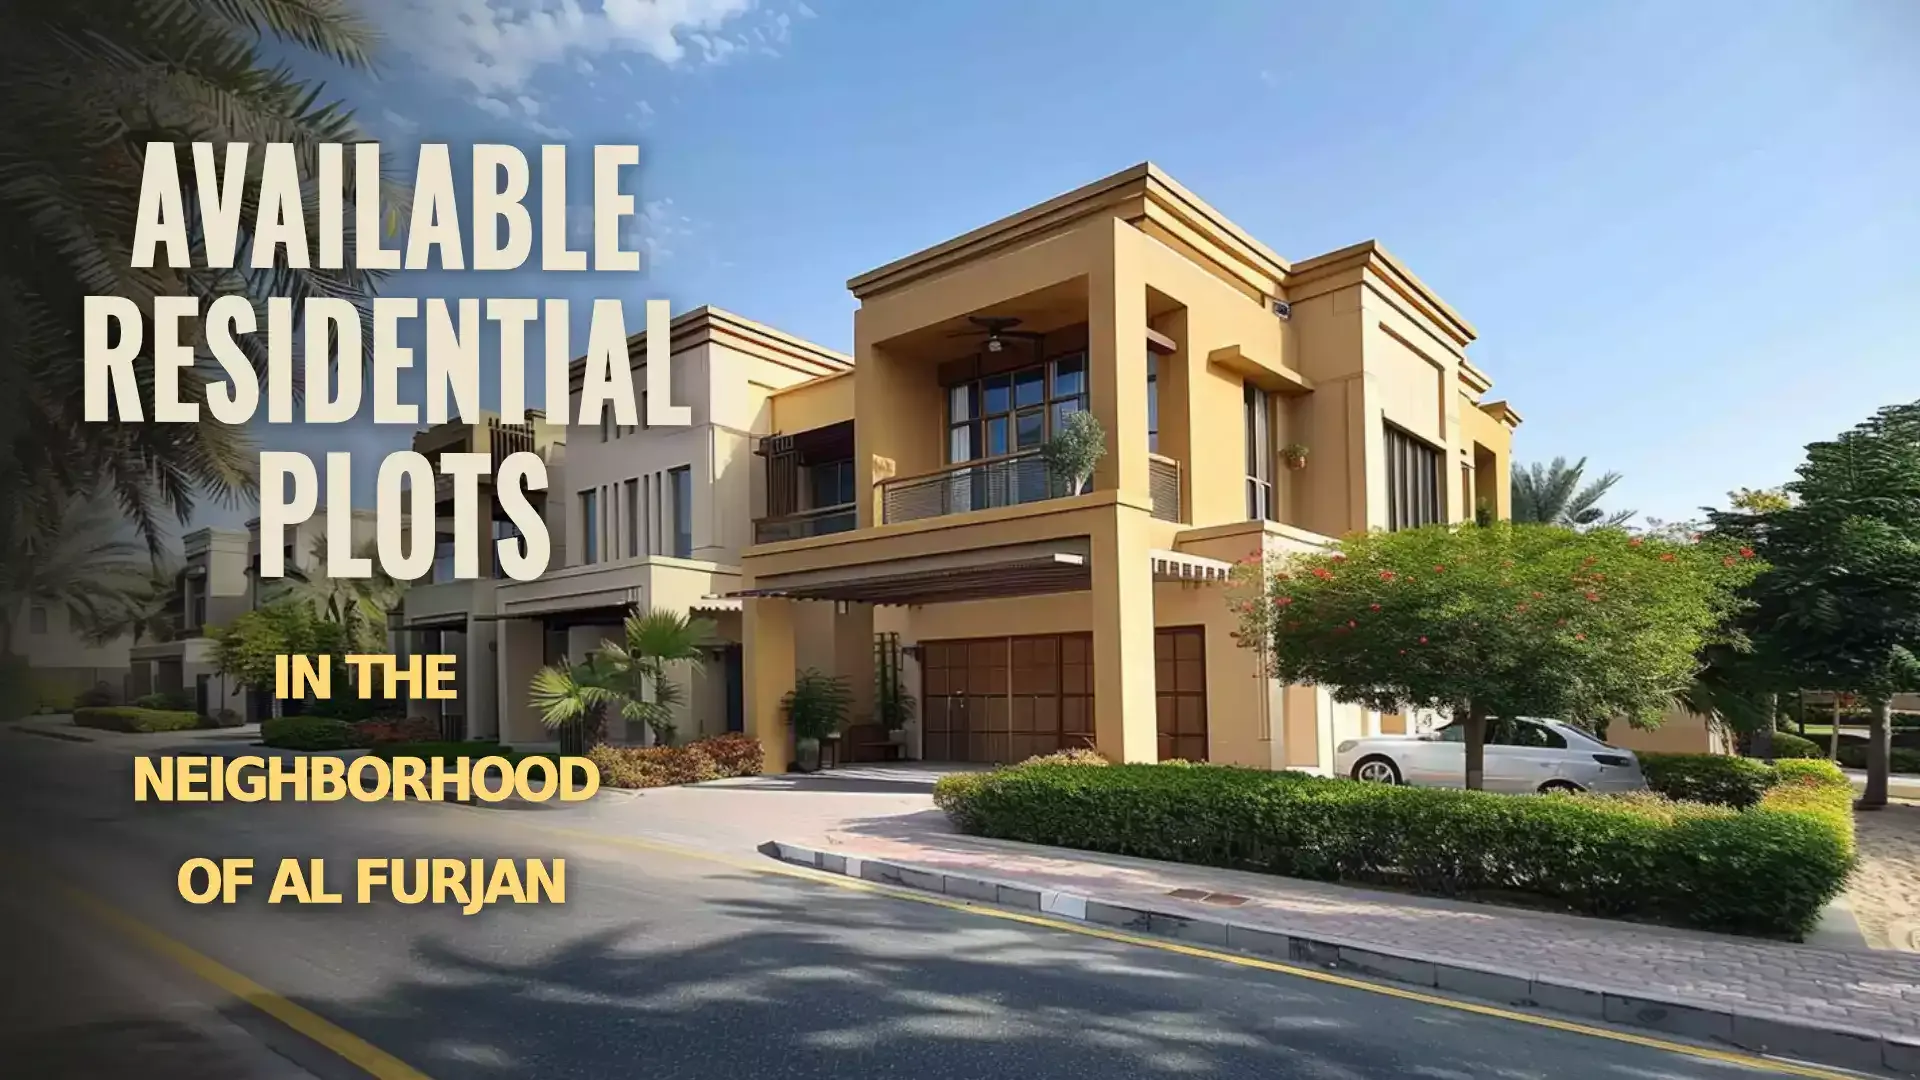 Residential Plots in Al Furjan - Ideal Investment Options for Homebuyers